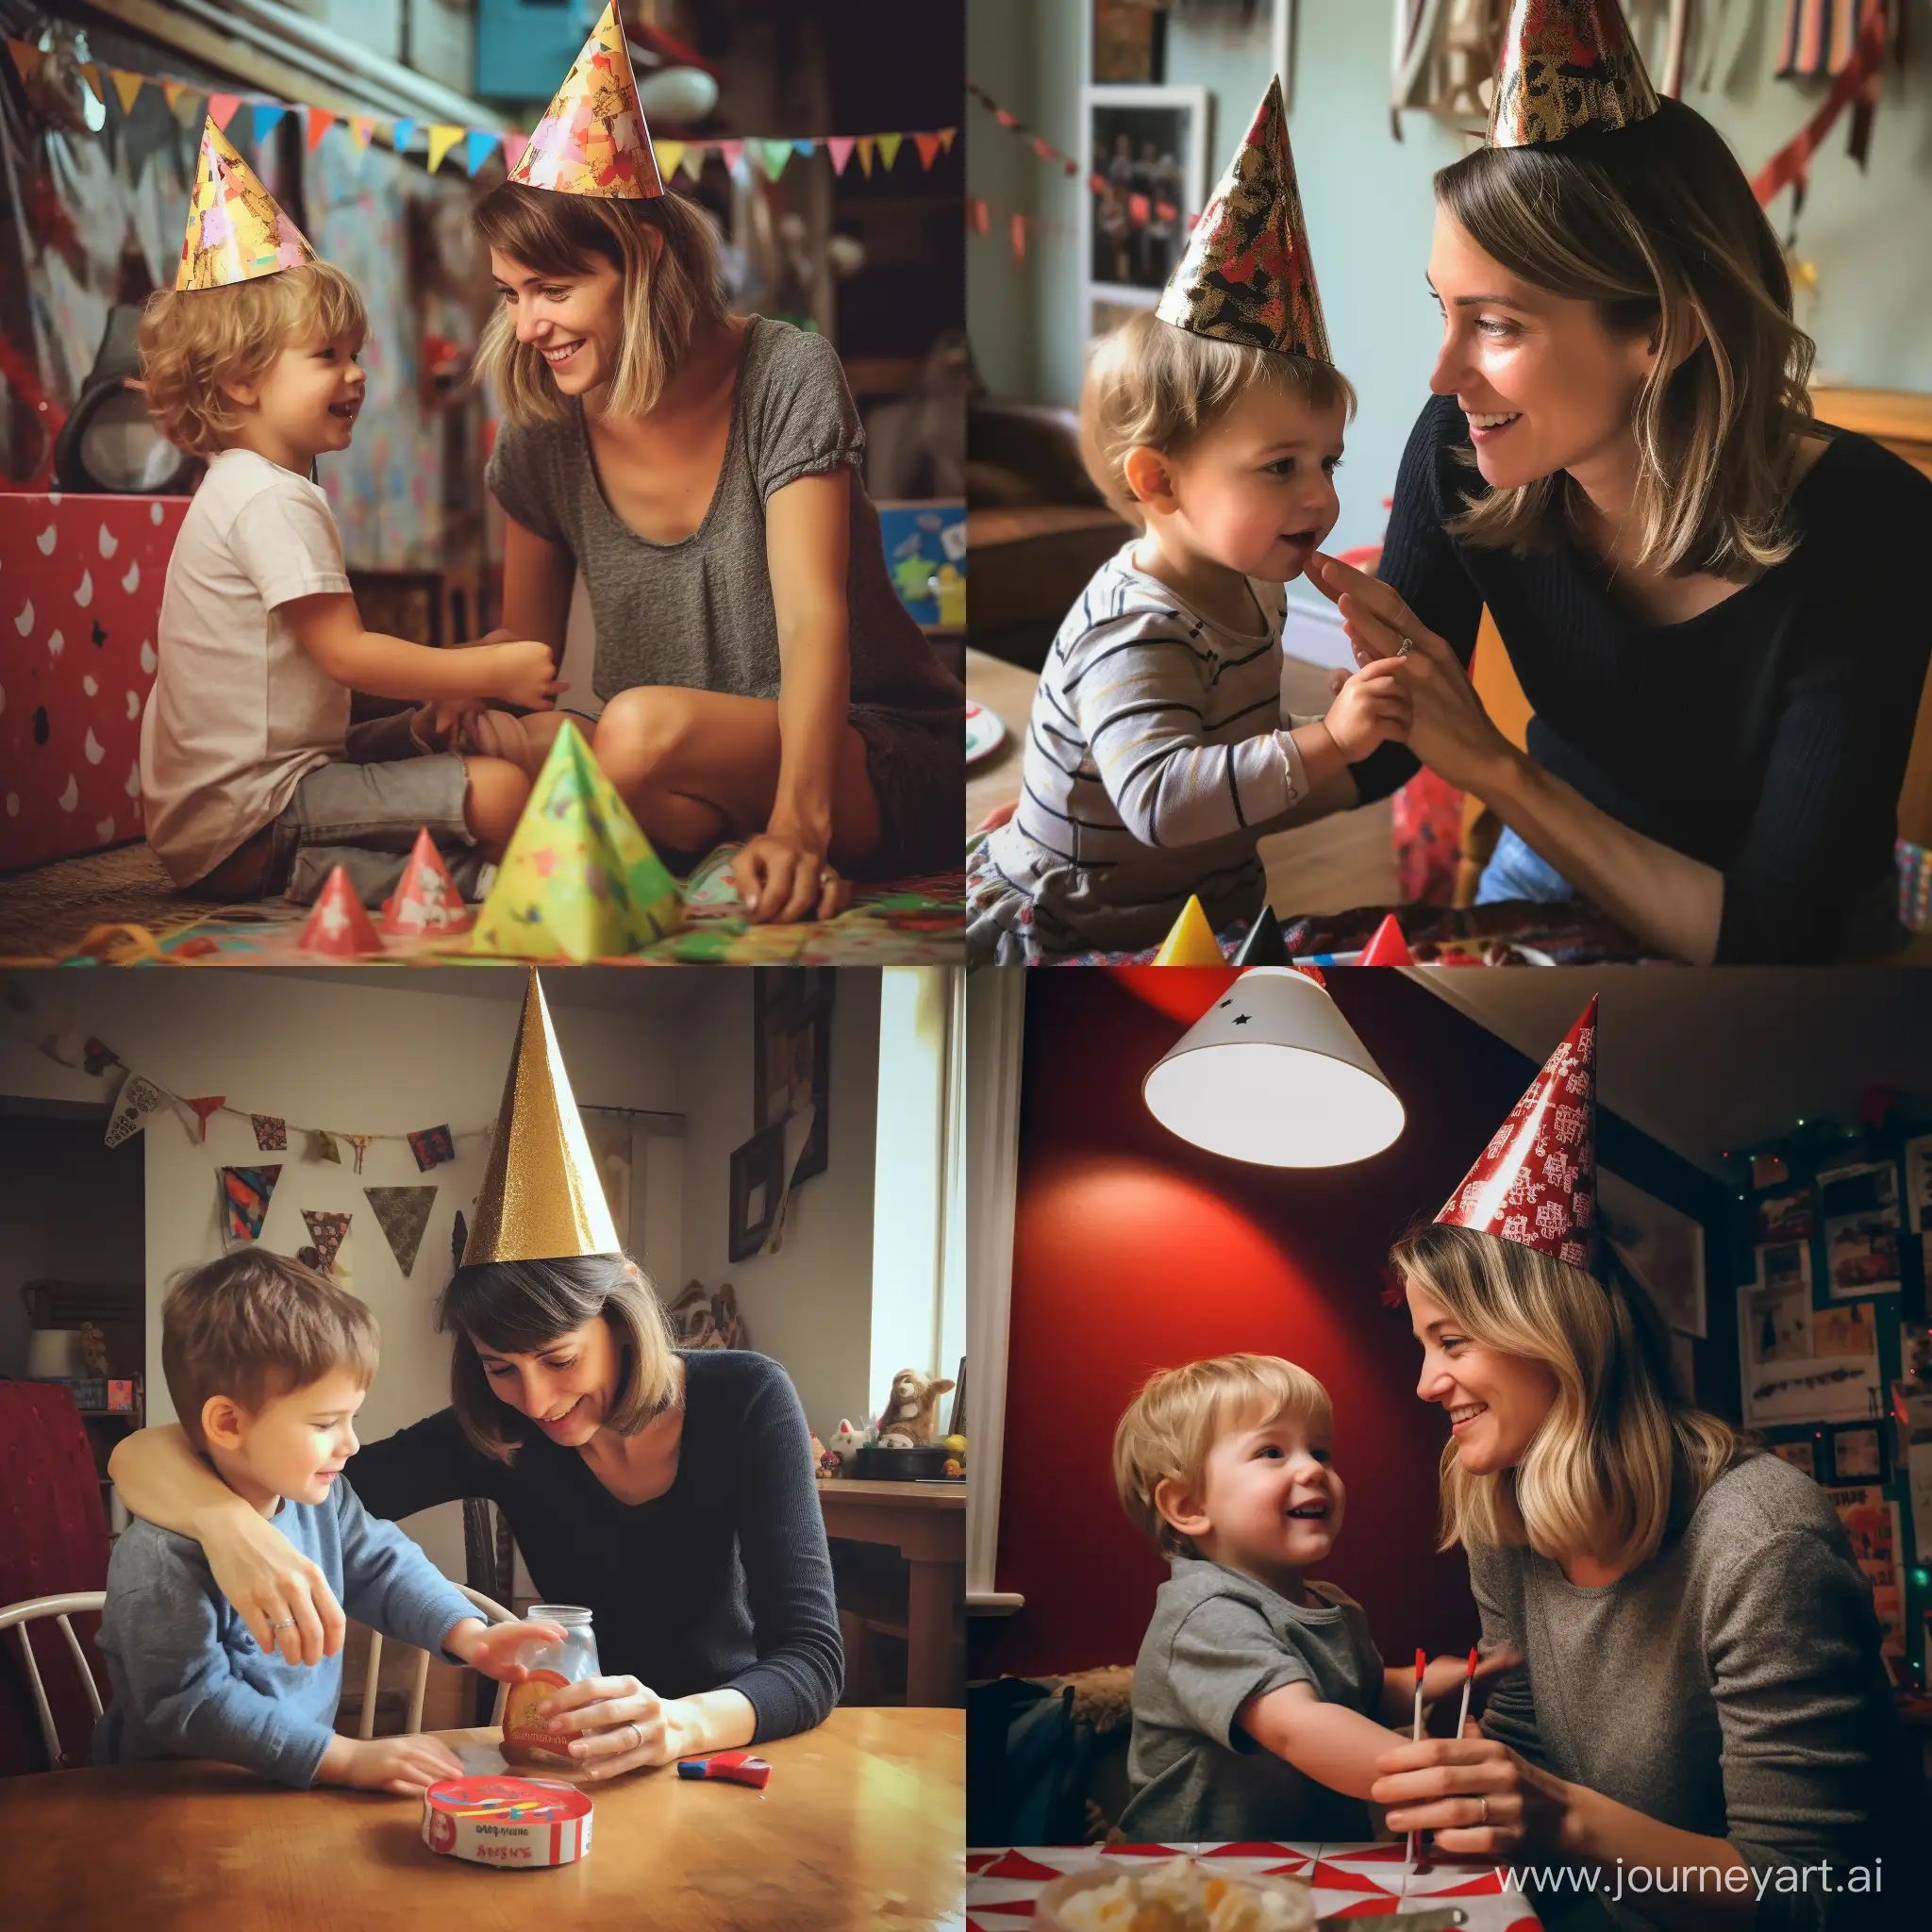 Mother-Celebrates-Childs-Birthday-with-Hat-at-Joyful-Party